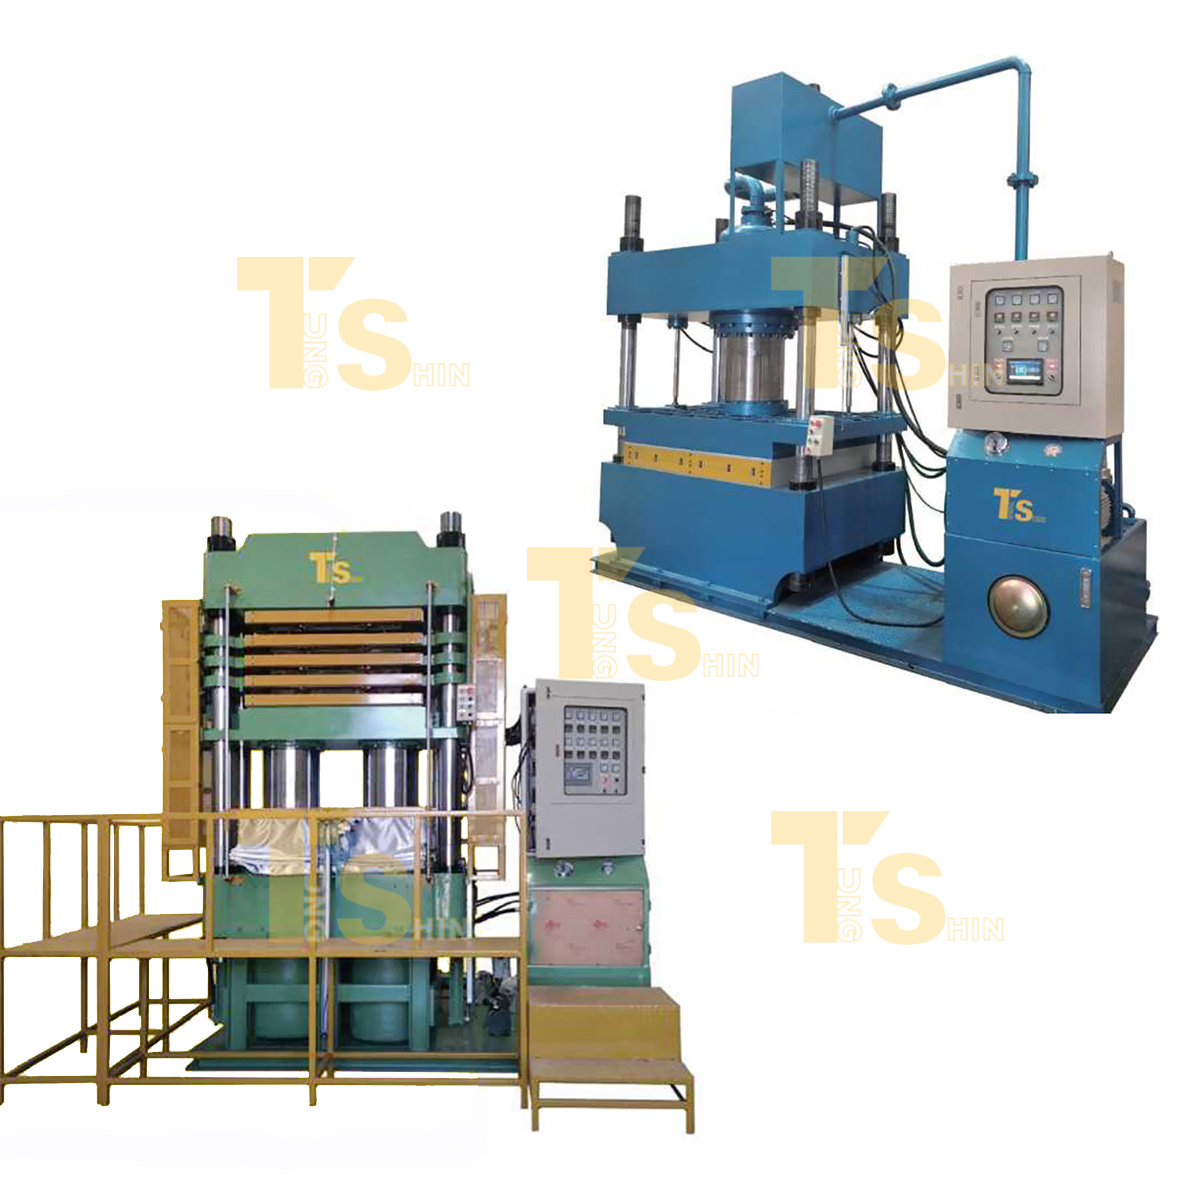 How can we extend the life of vertical rubber injection machine?